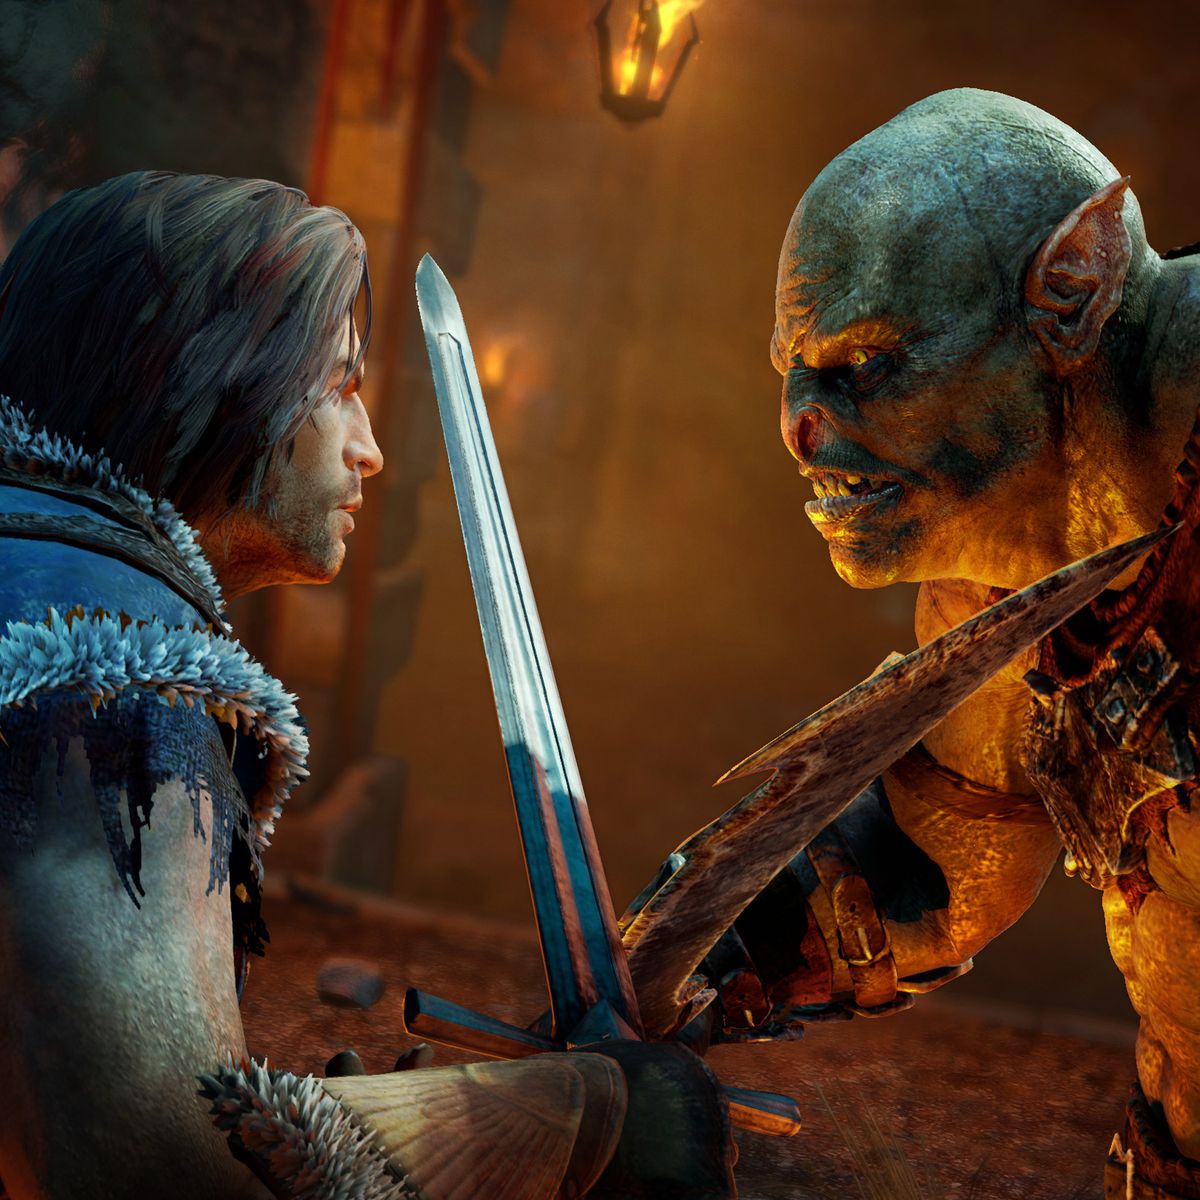 Brand-new trailer for Middle-earth: Shadow of Mordor showcasing